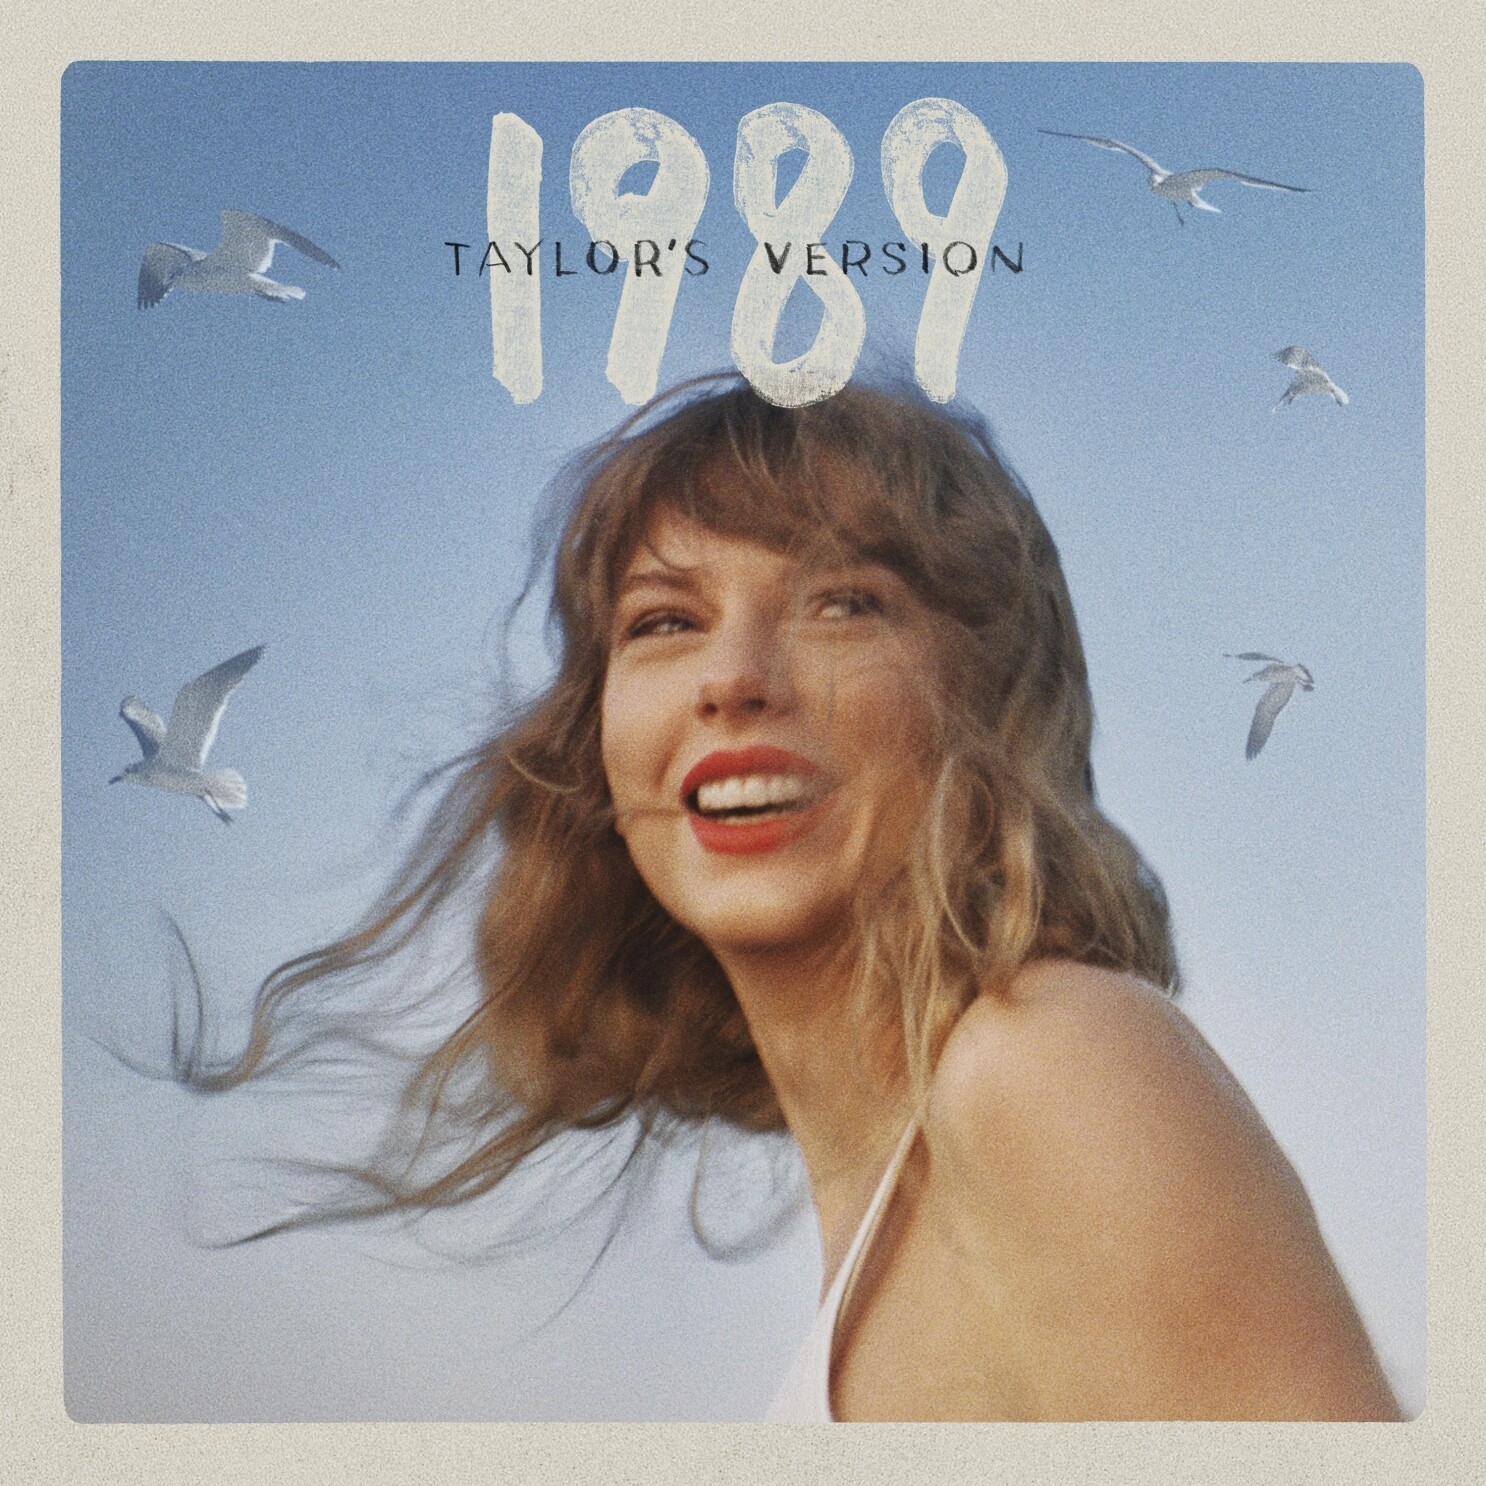 The album cover for 1989 (Taylor&#x27;s Version) showing Taylor smiling